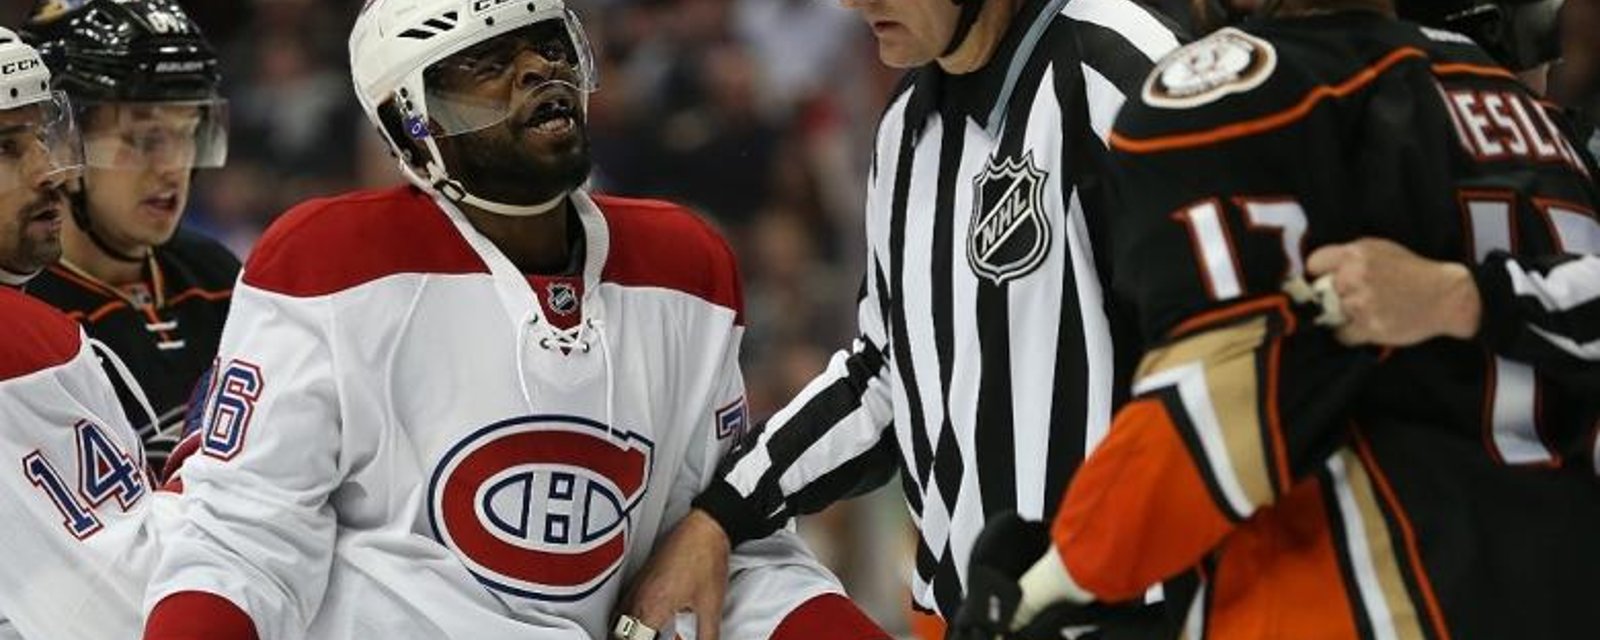 NHL Legend on P.K. Subban: 'In our day I believe he would have received a slash to the back of the head'